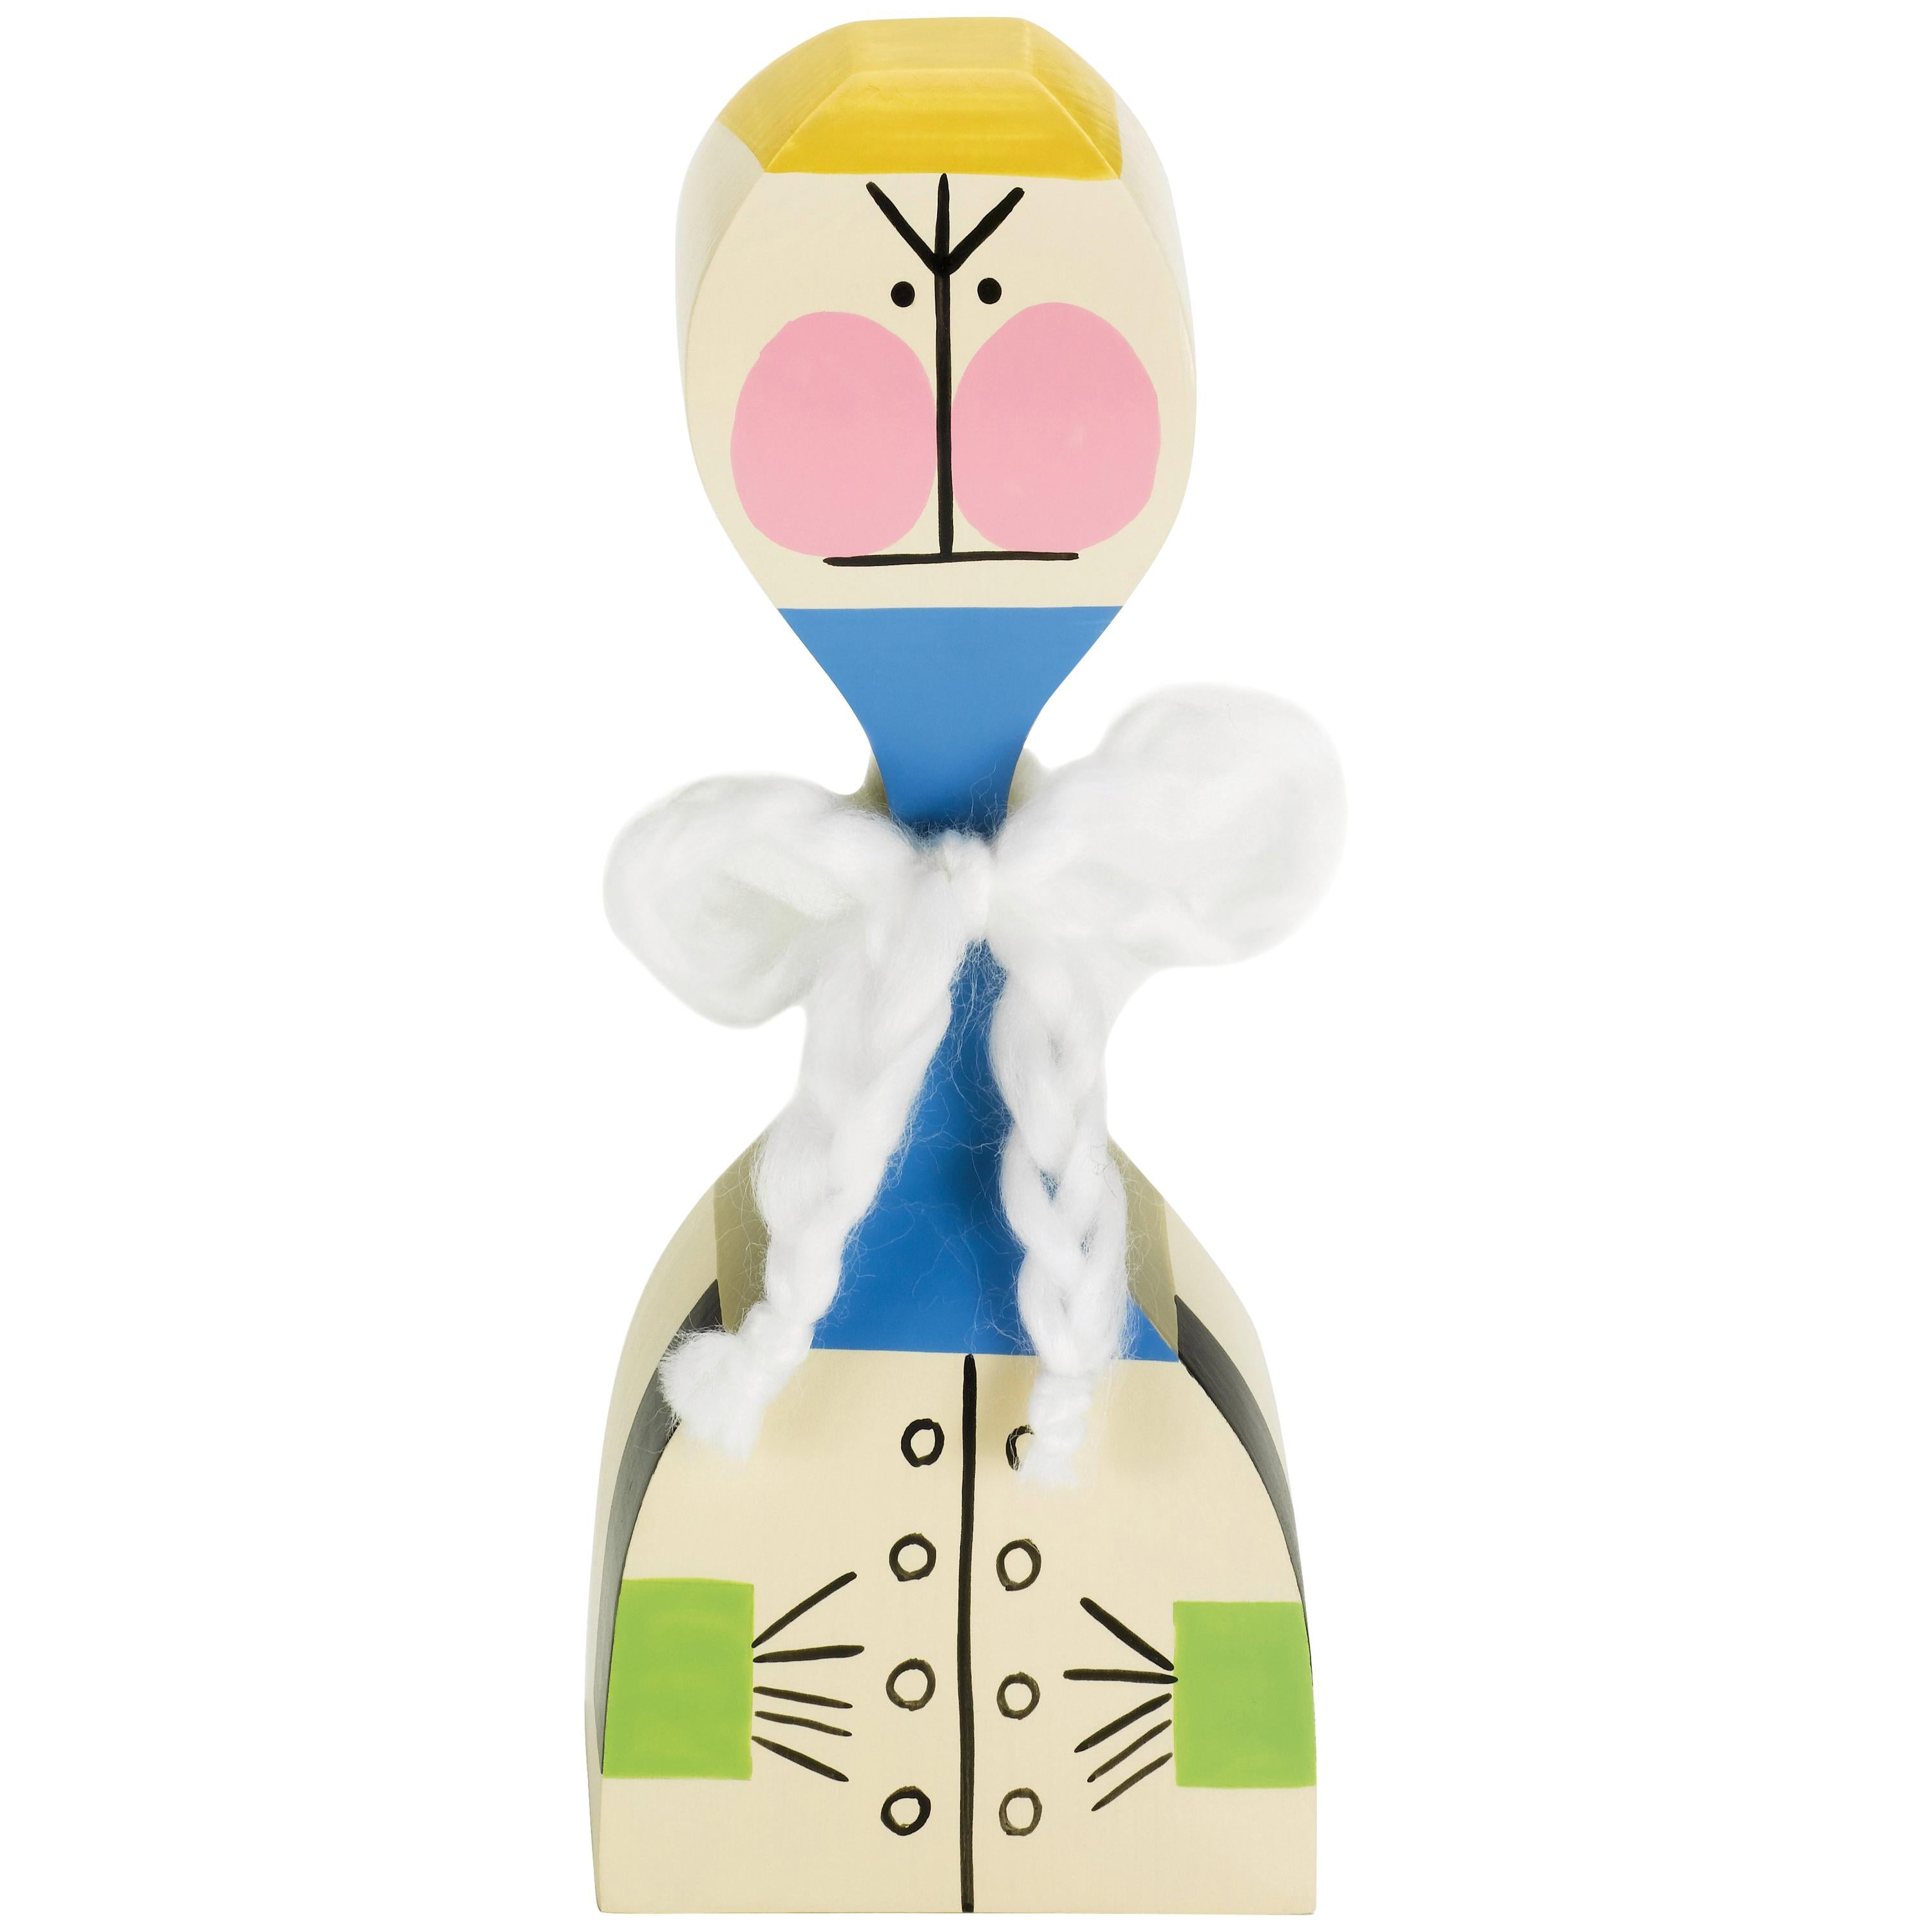 Vitra Wooden Doll No. 21 by Alexander Girard For Sale